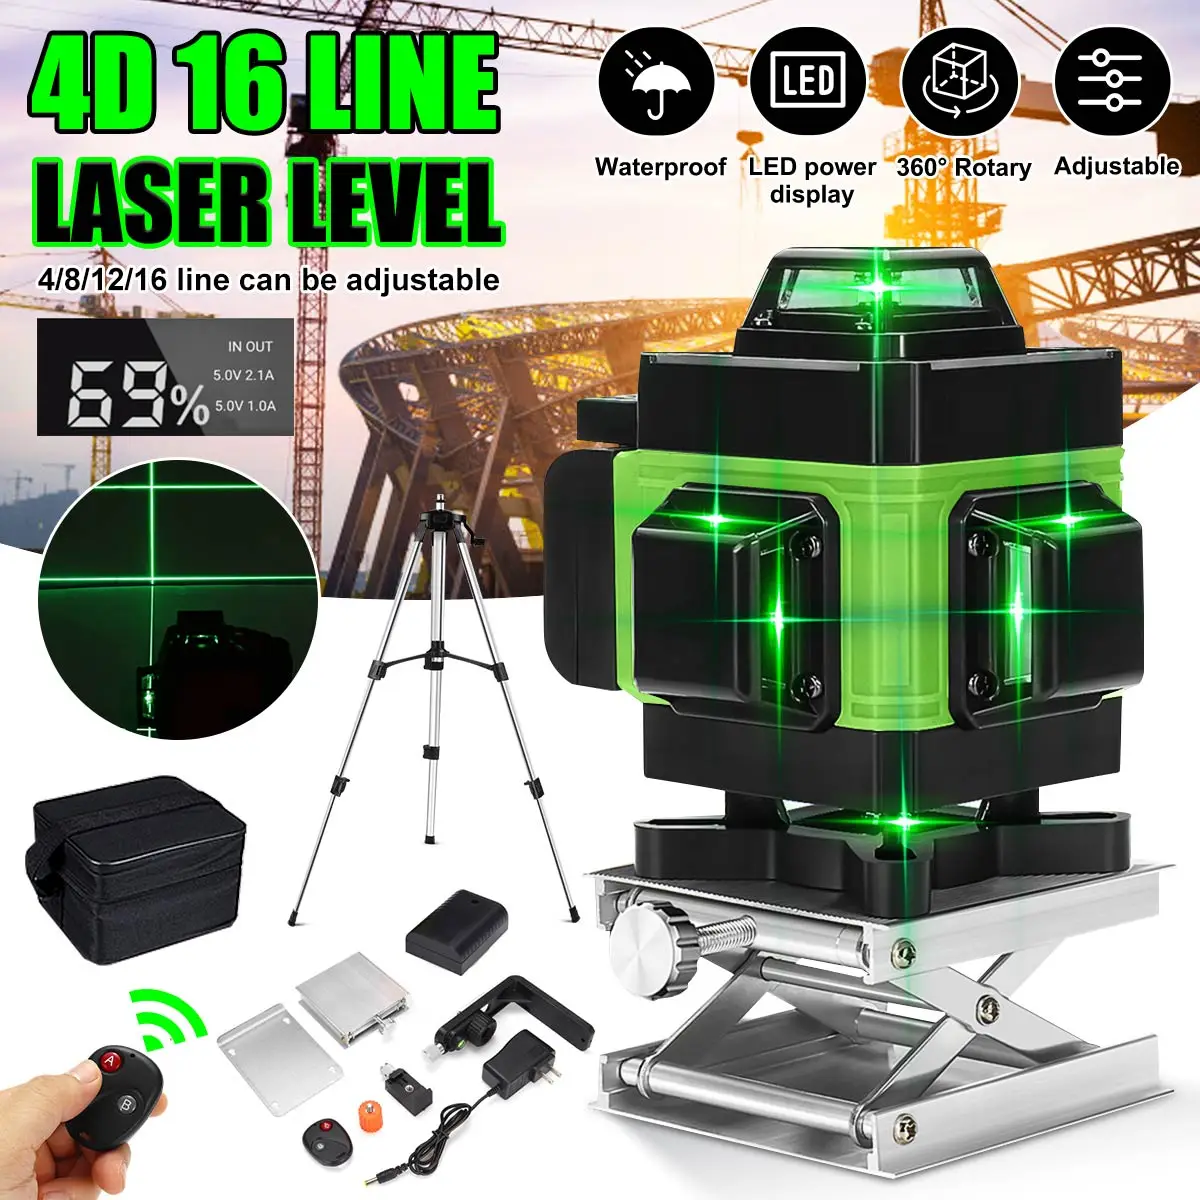 4D 16 Lines Green Laser Level 360° Auto Self Leveling Rotary Cross Measure Tool 